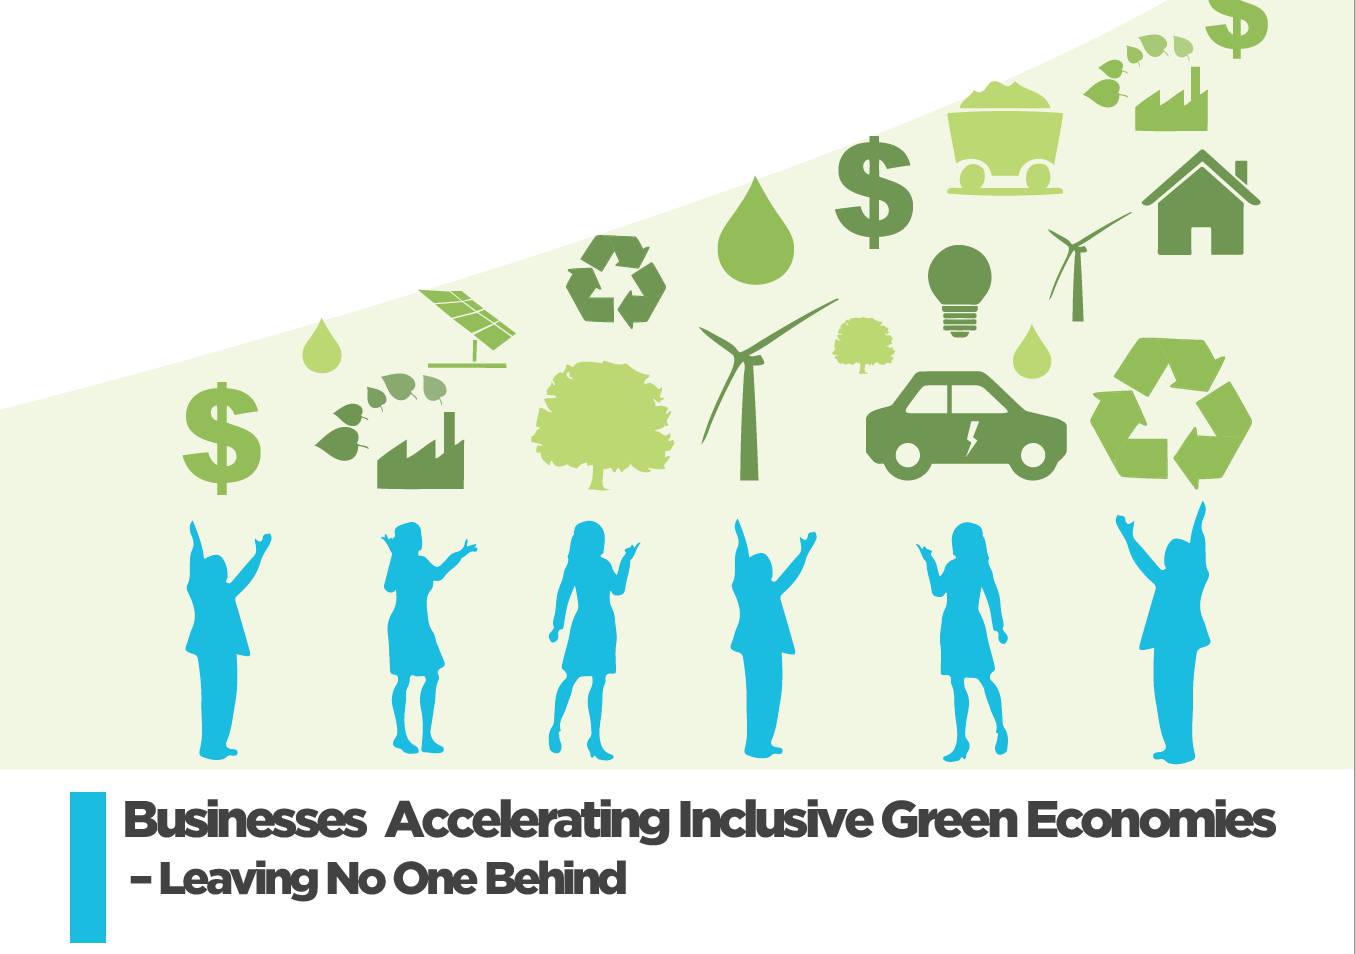 Businesses Accelerating Inclusive Green Economies- Leaving No One Behind